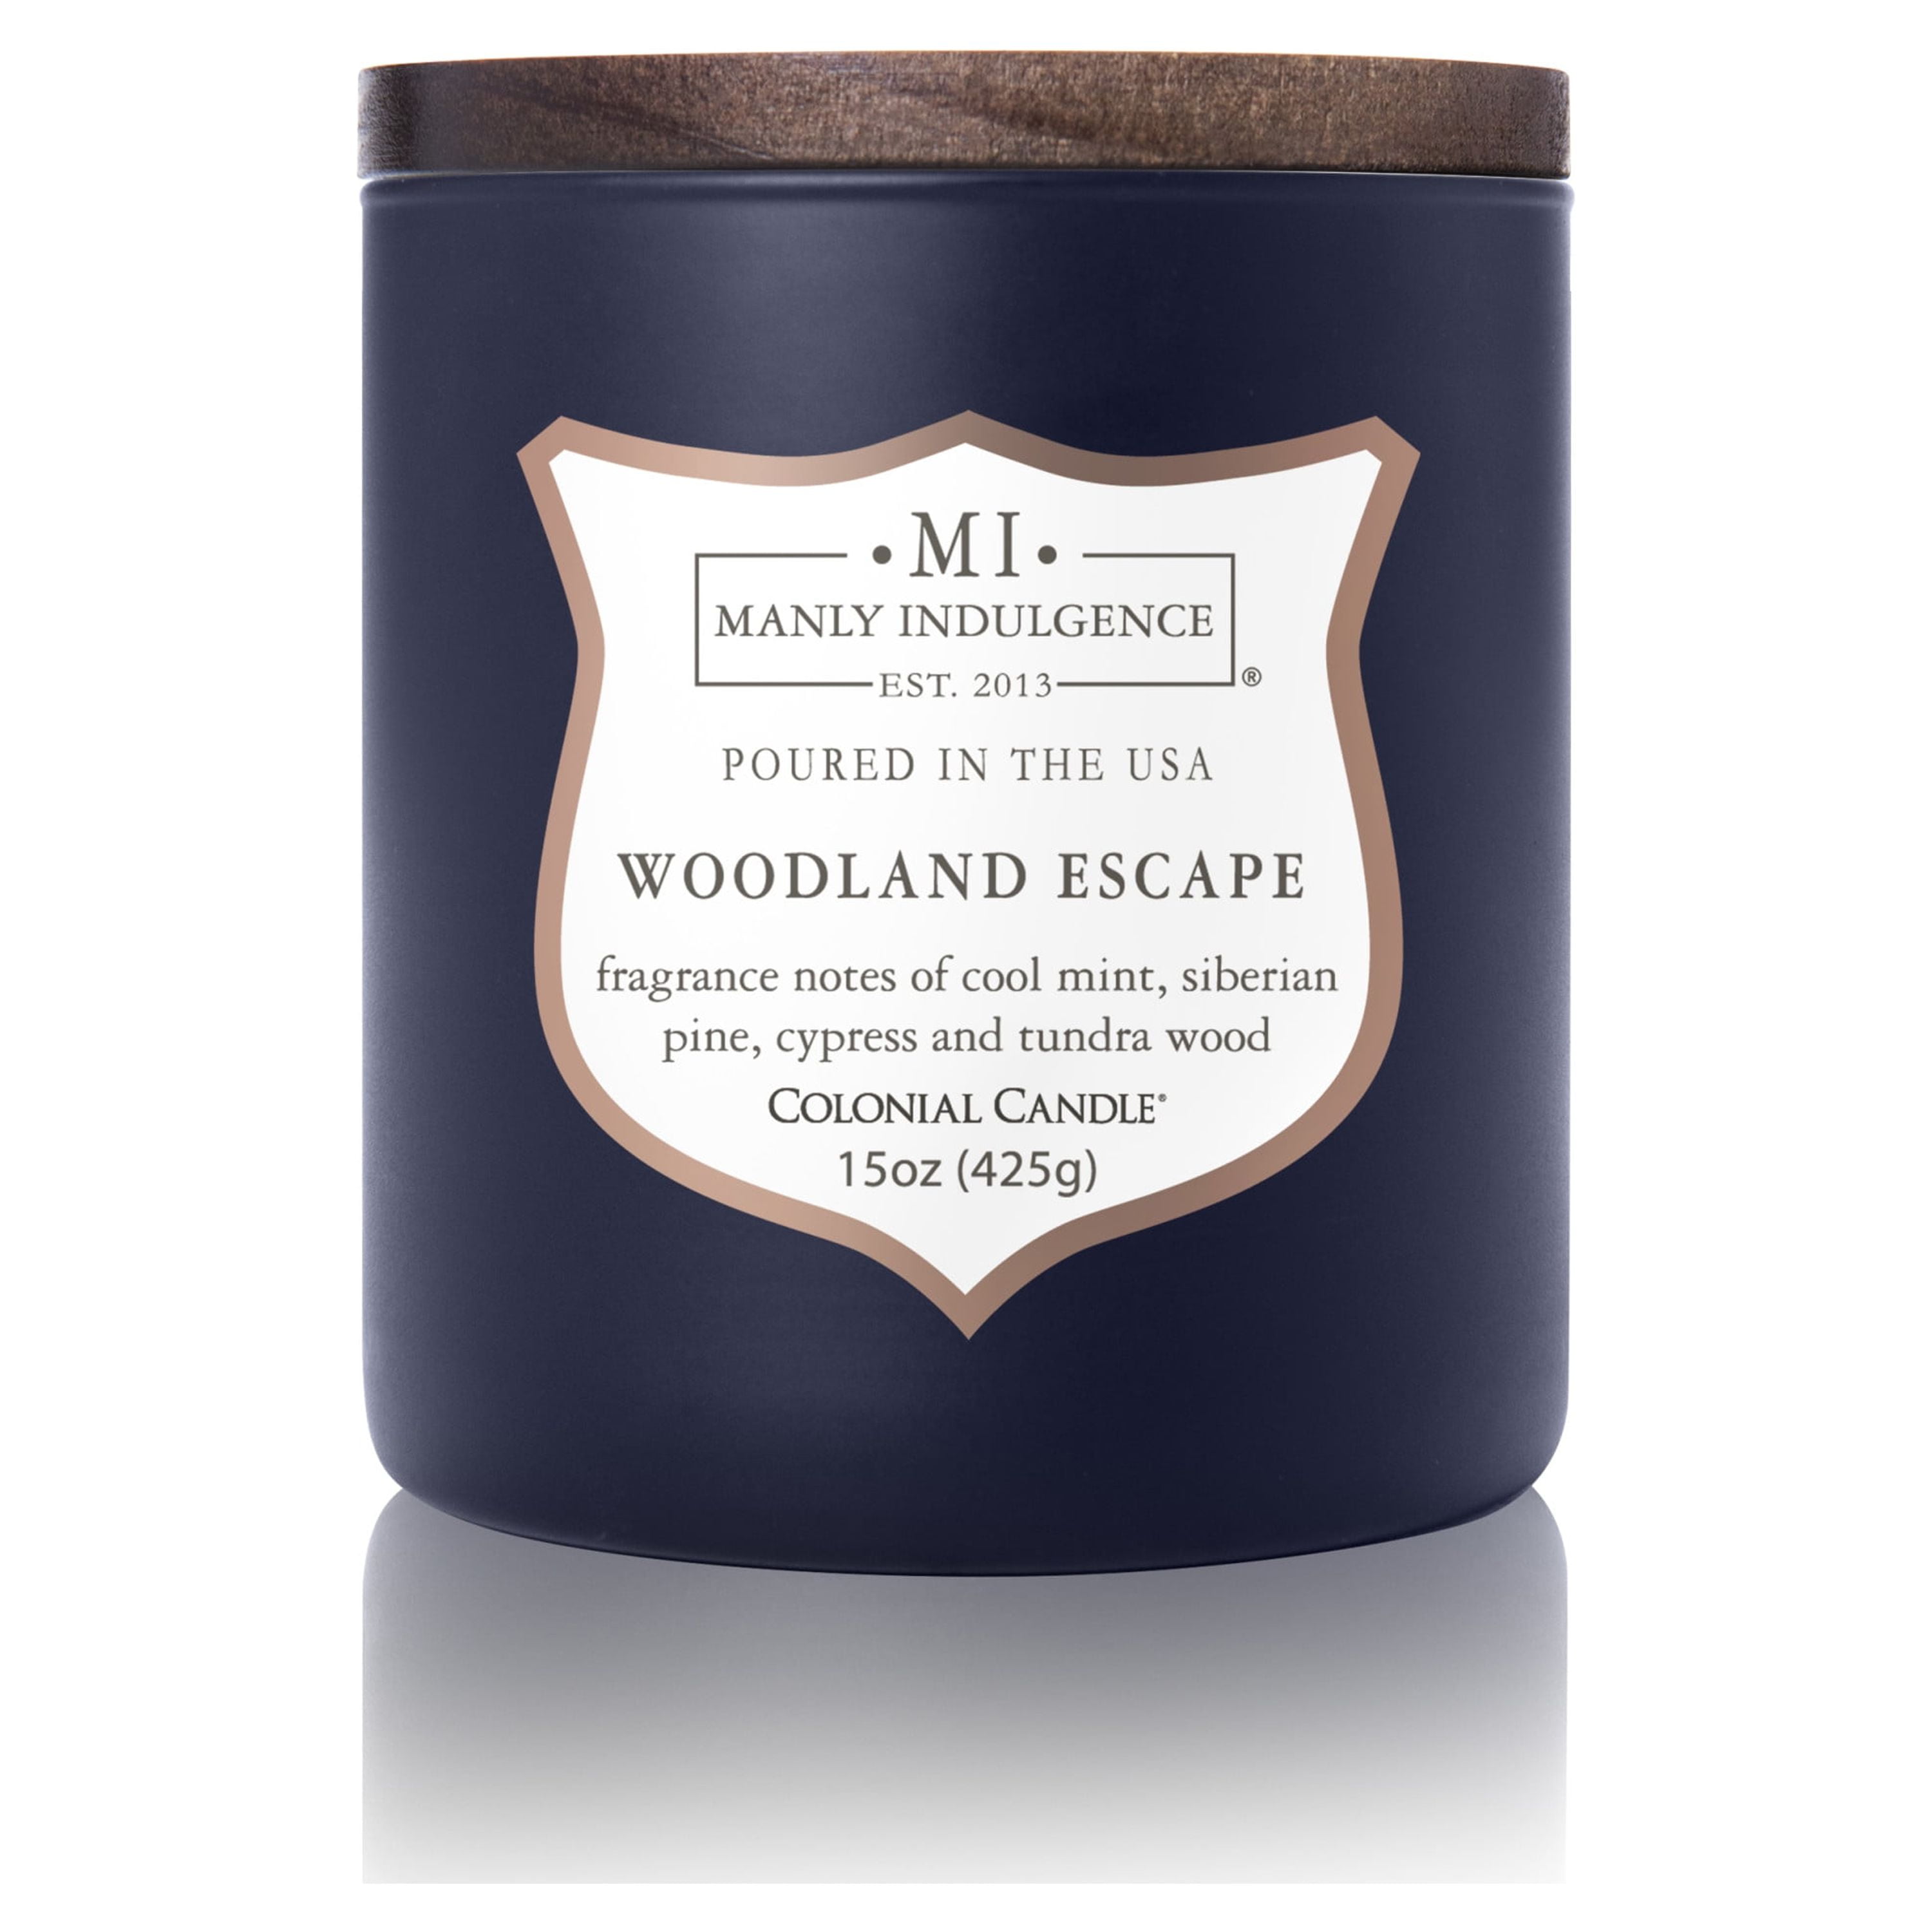 Scented Candle Gift Set with Crackling Wood Wicks 3, 4oz Candles, Misty  Falls, Alpine Spruce, Spring Meadow - Designed for Both Men Women, Man Cave